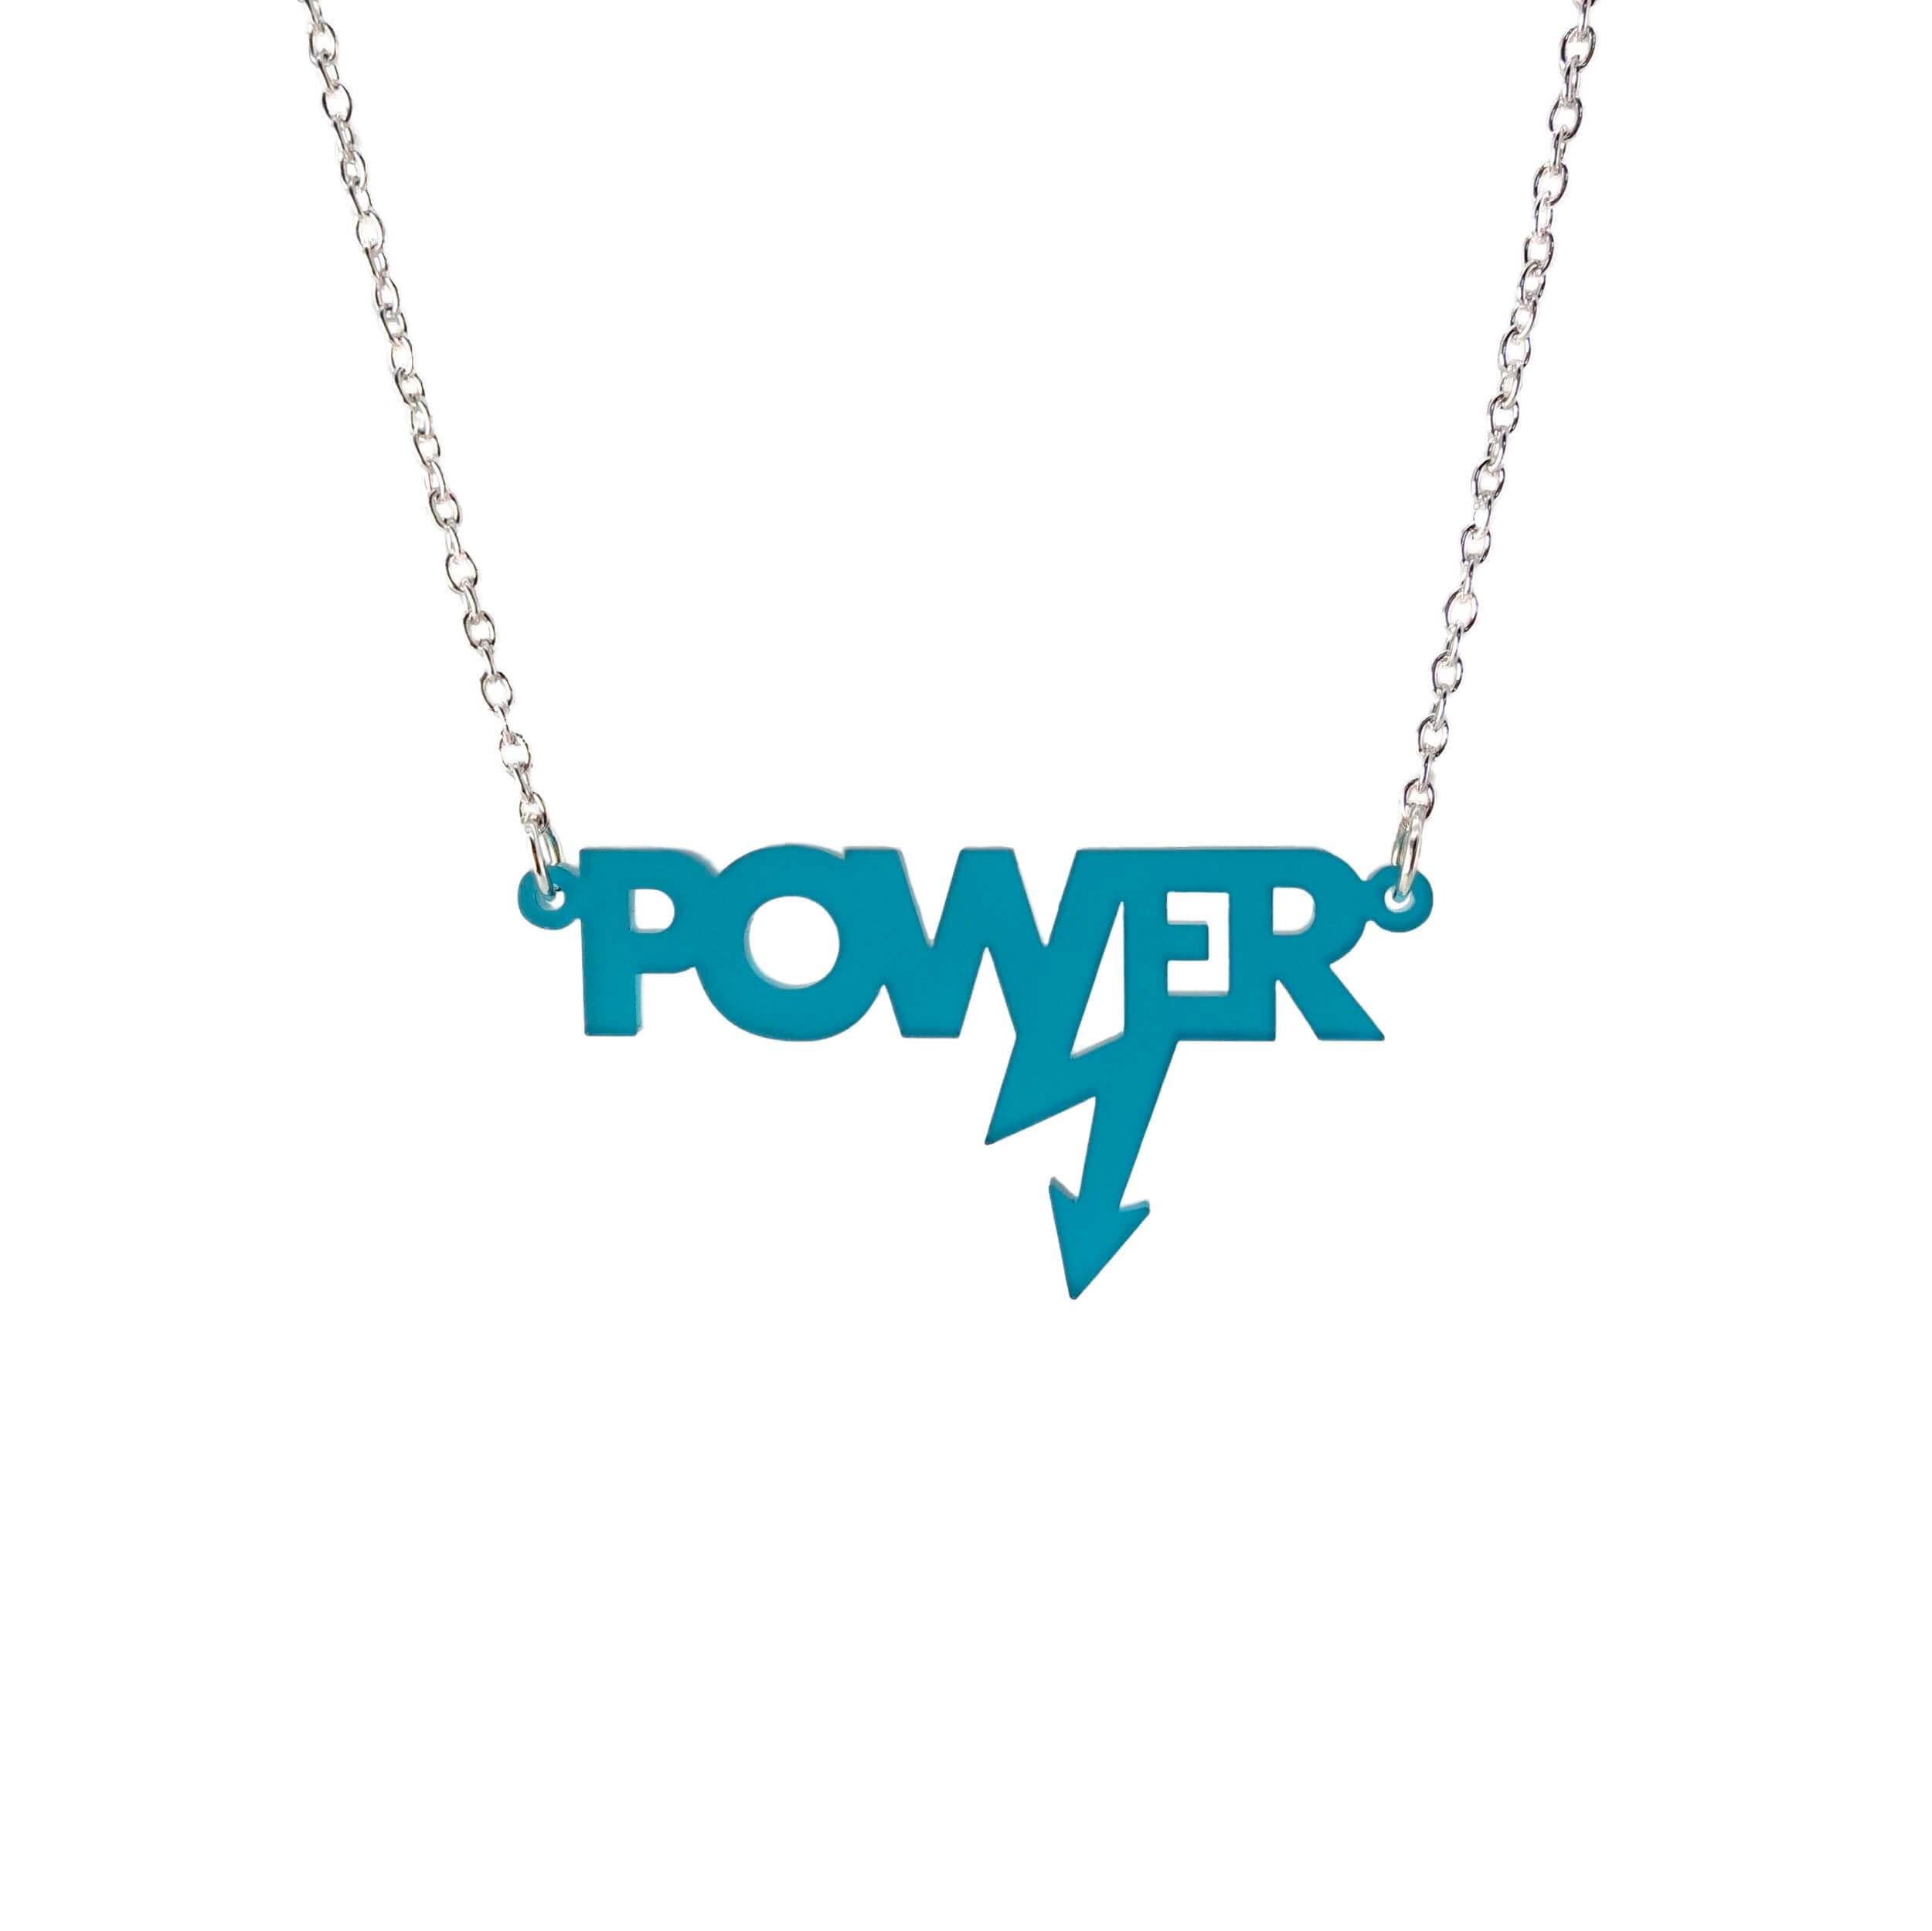 Mini power necklace in teal frost shown hanging on a silver chain against a white background. Designed in collaboration with Mary Beard for her book Women and Power. 